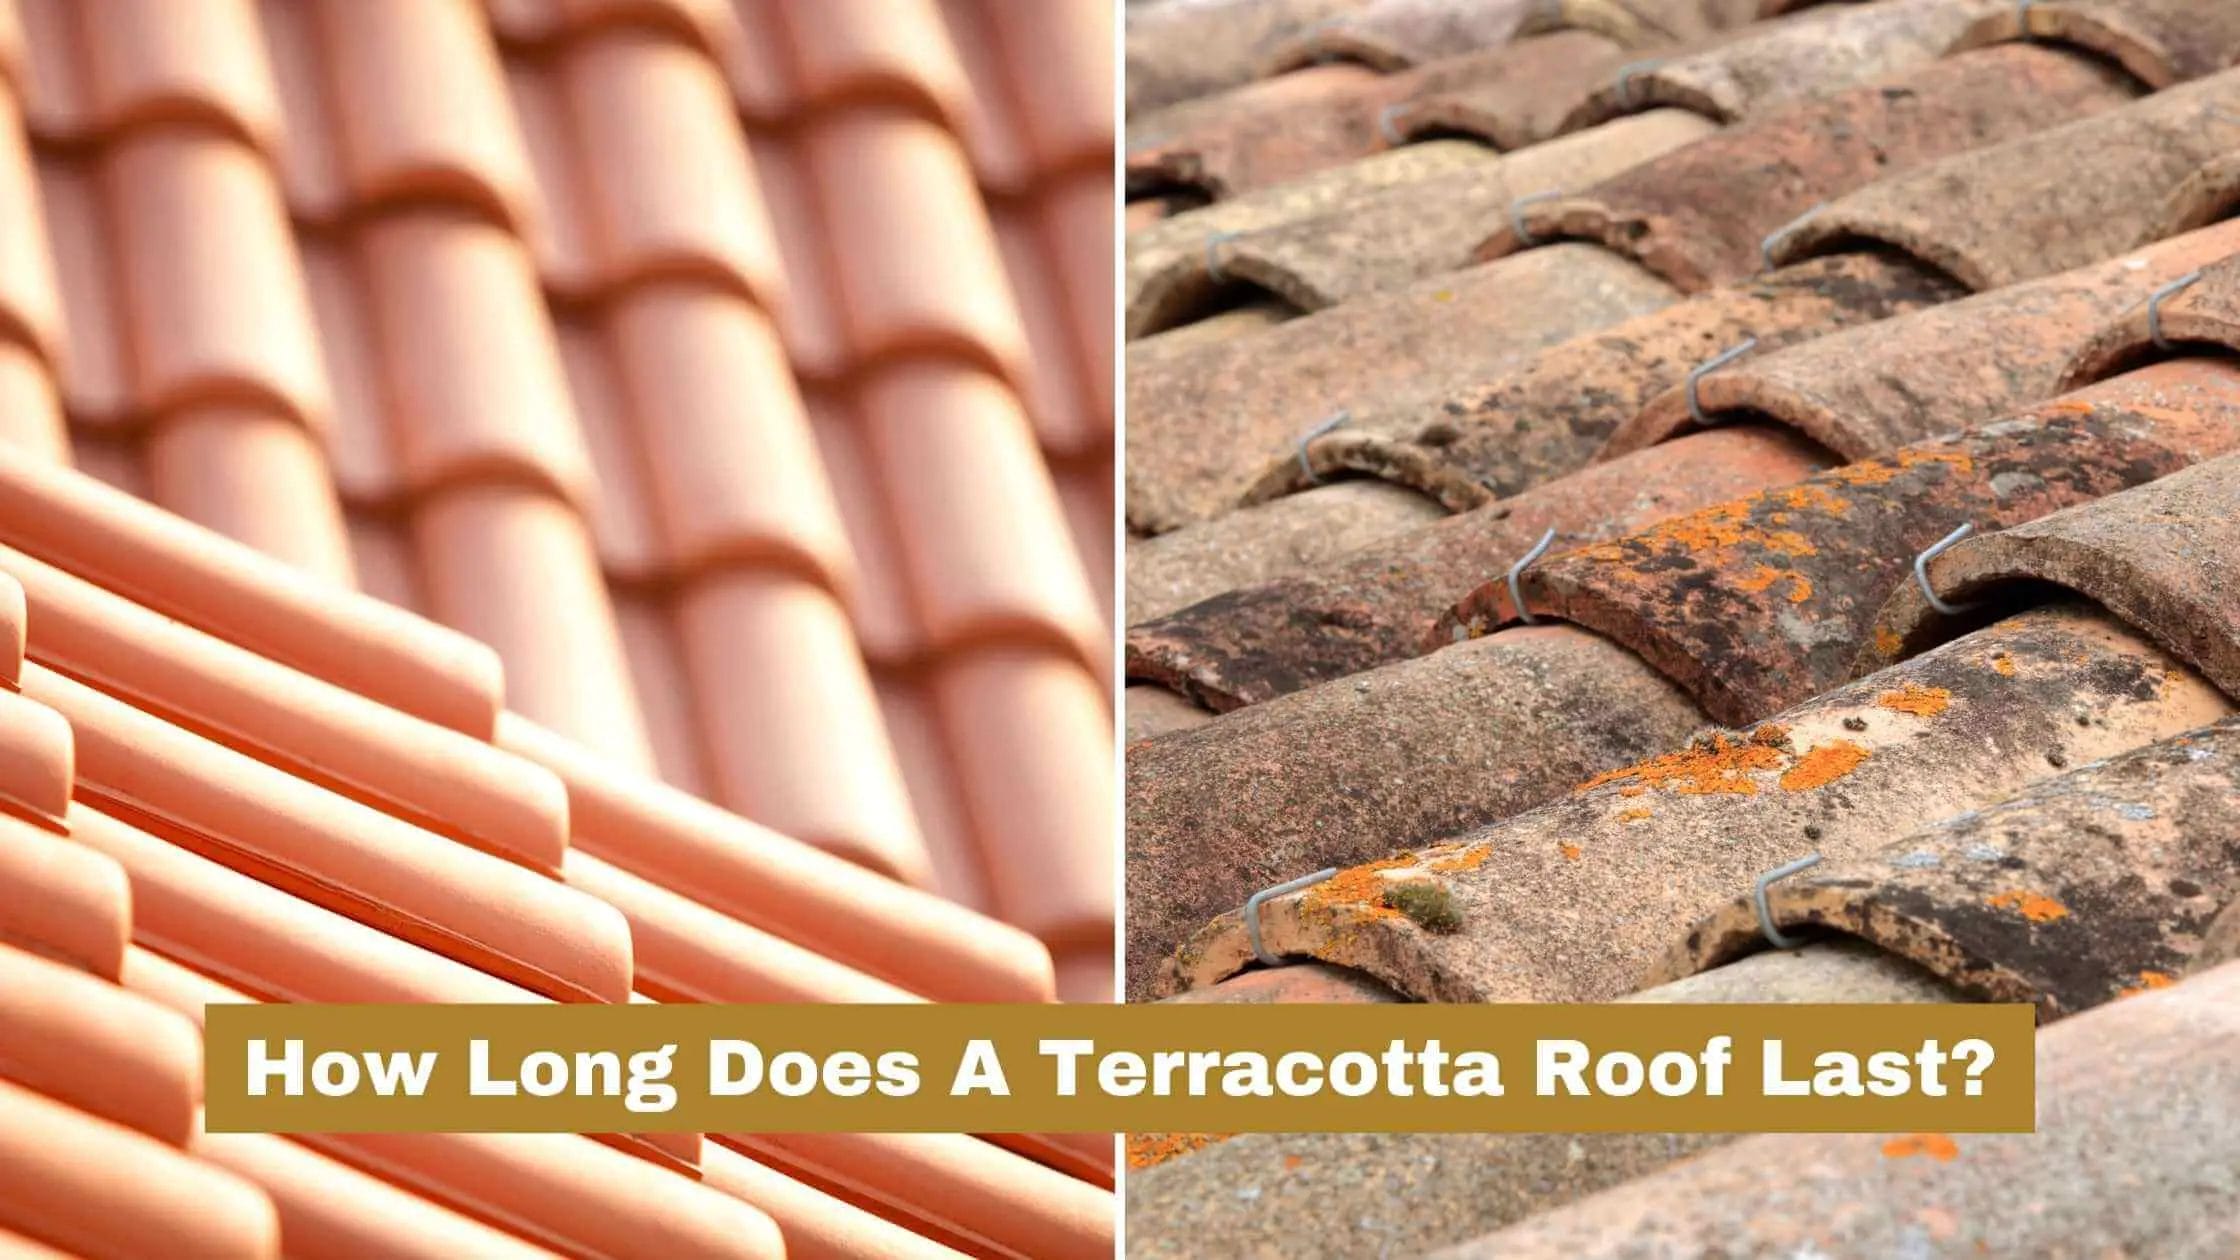 How Long Does A Terracotta Roof Last